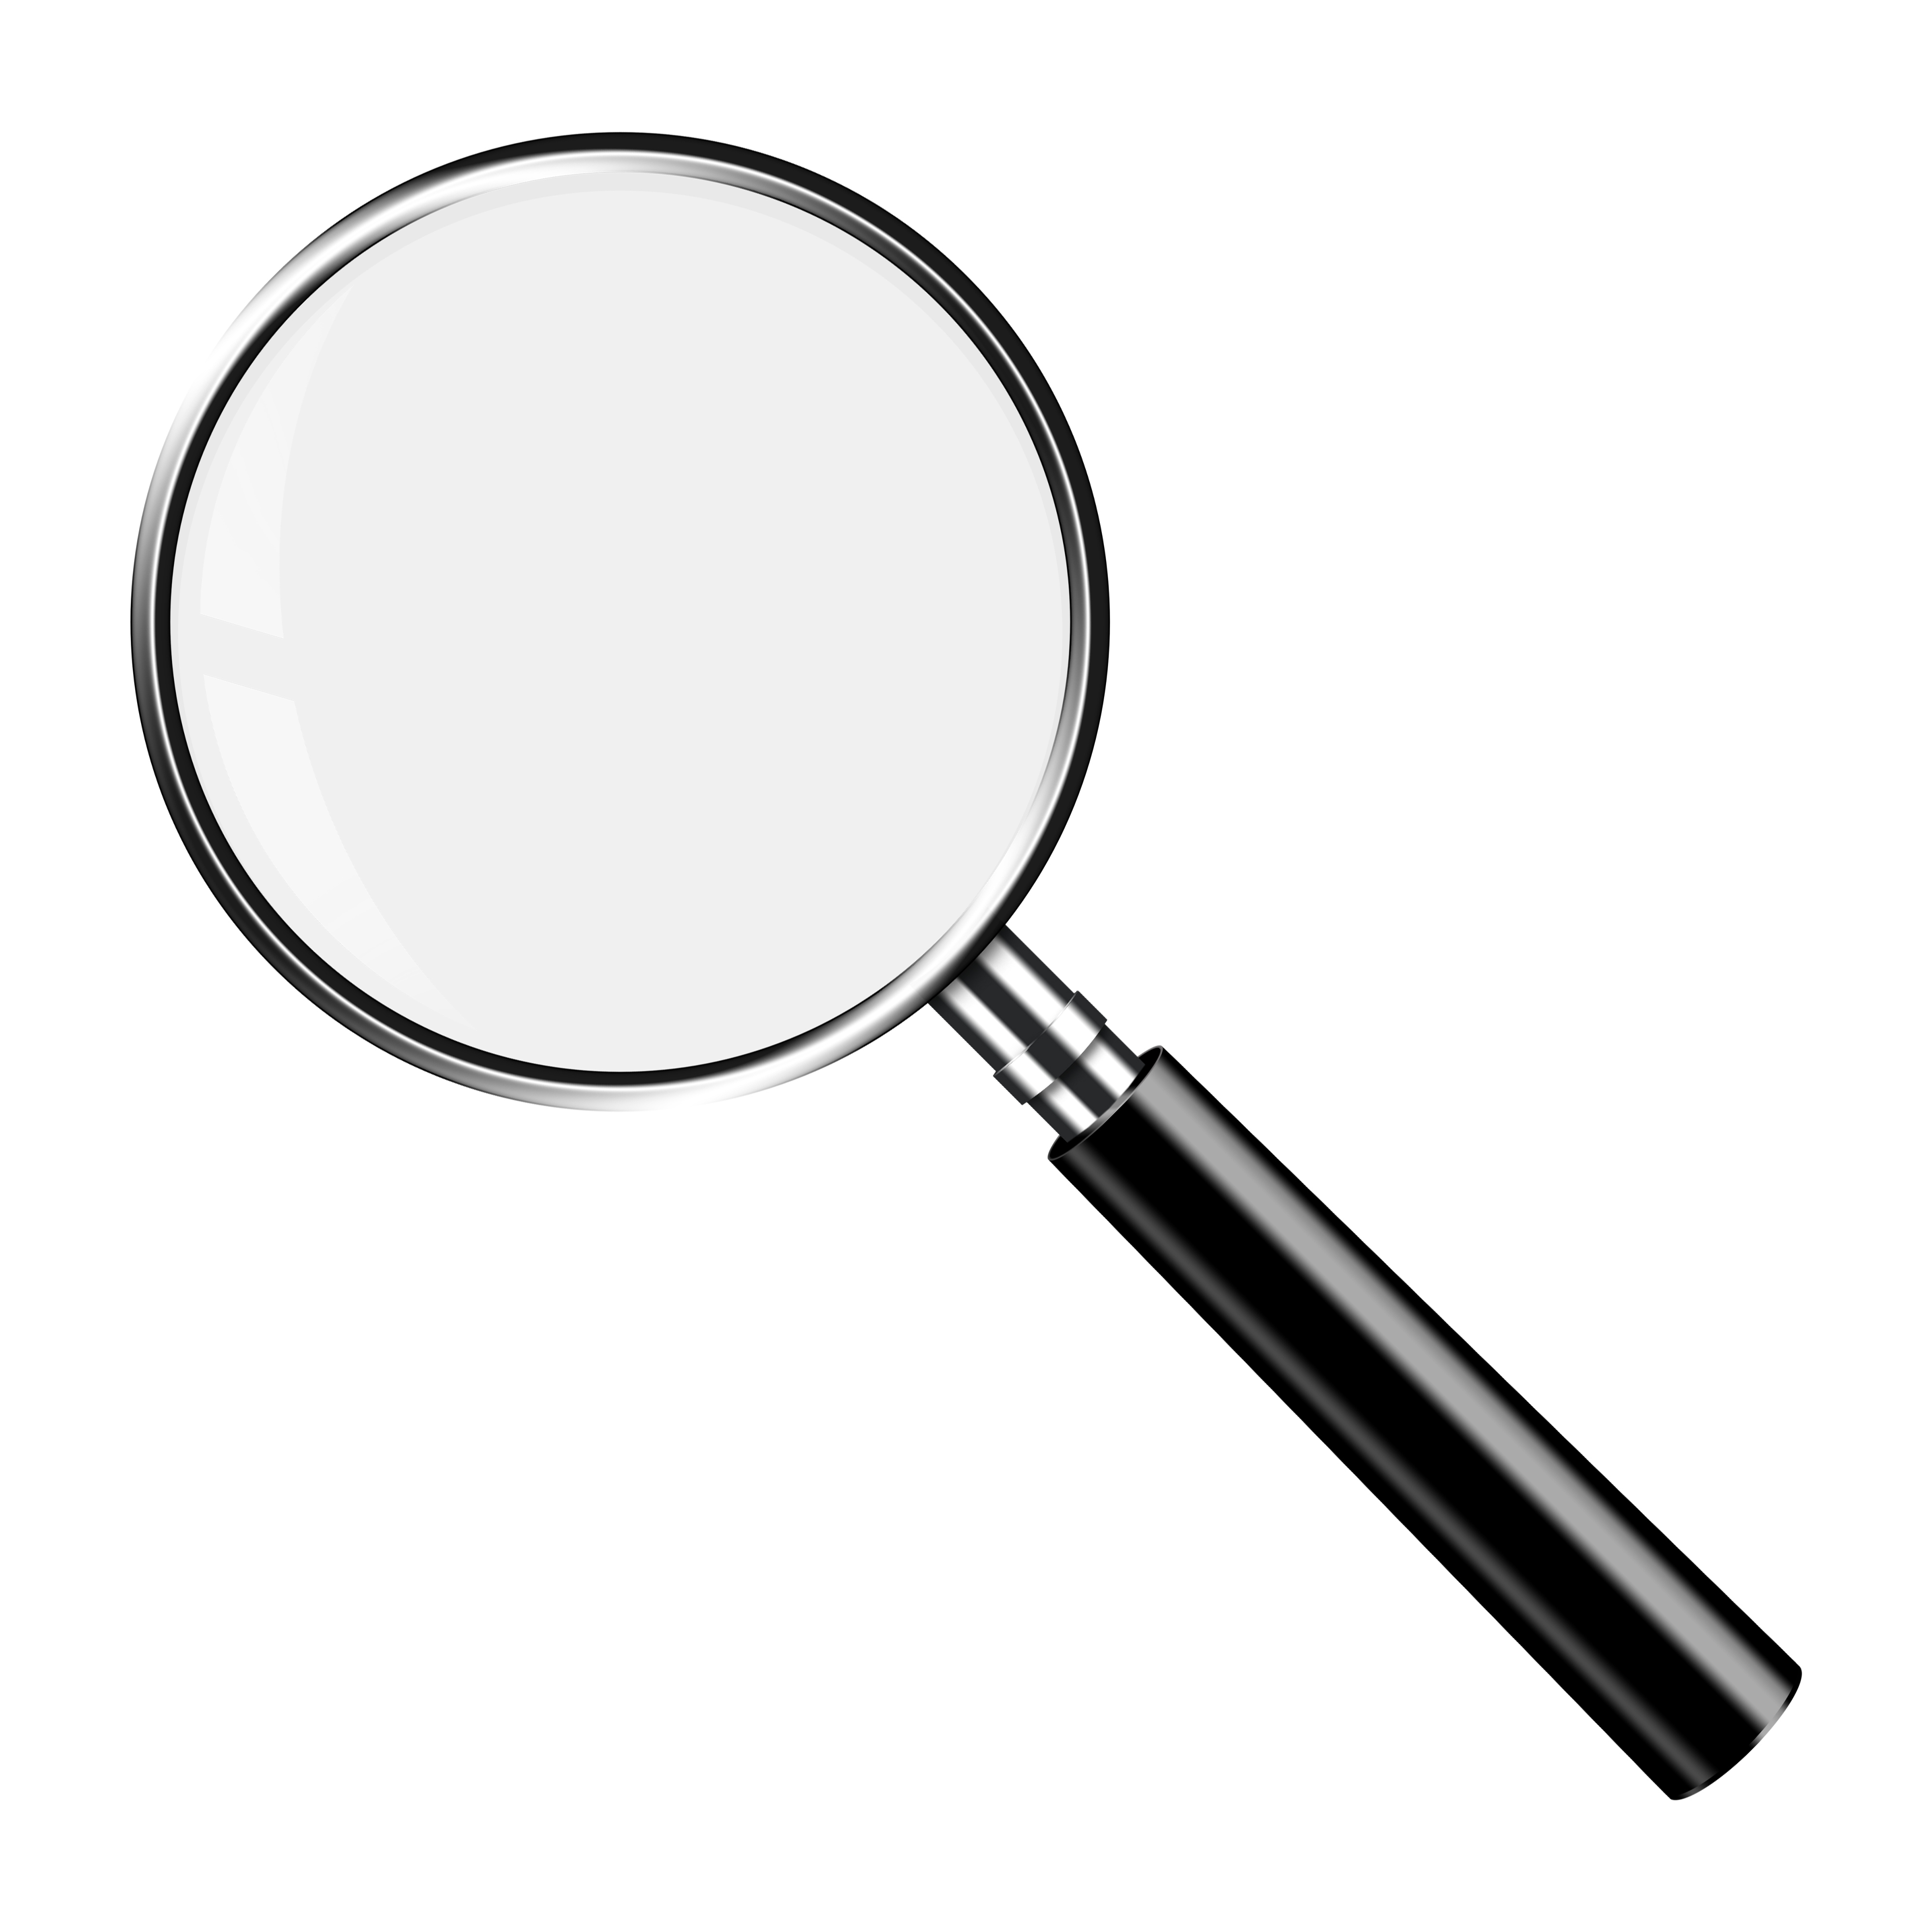 An image of a magnifying glass on a white background